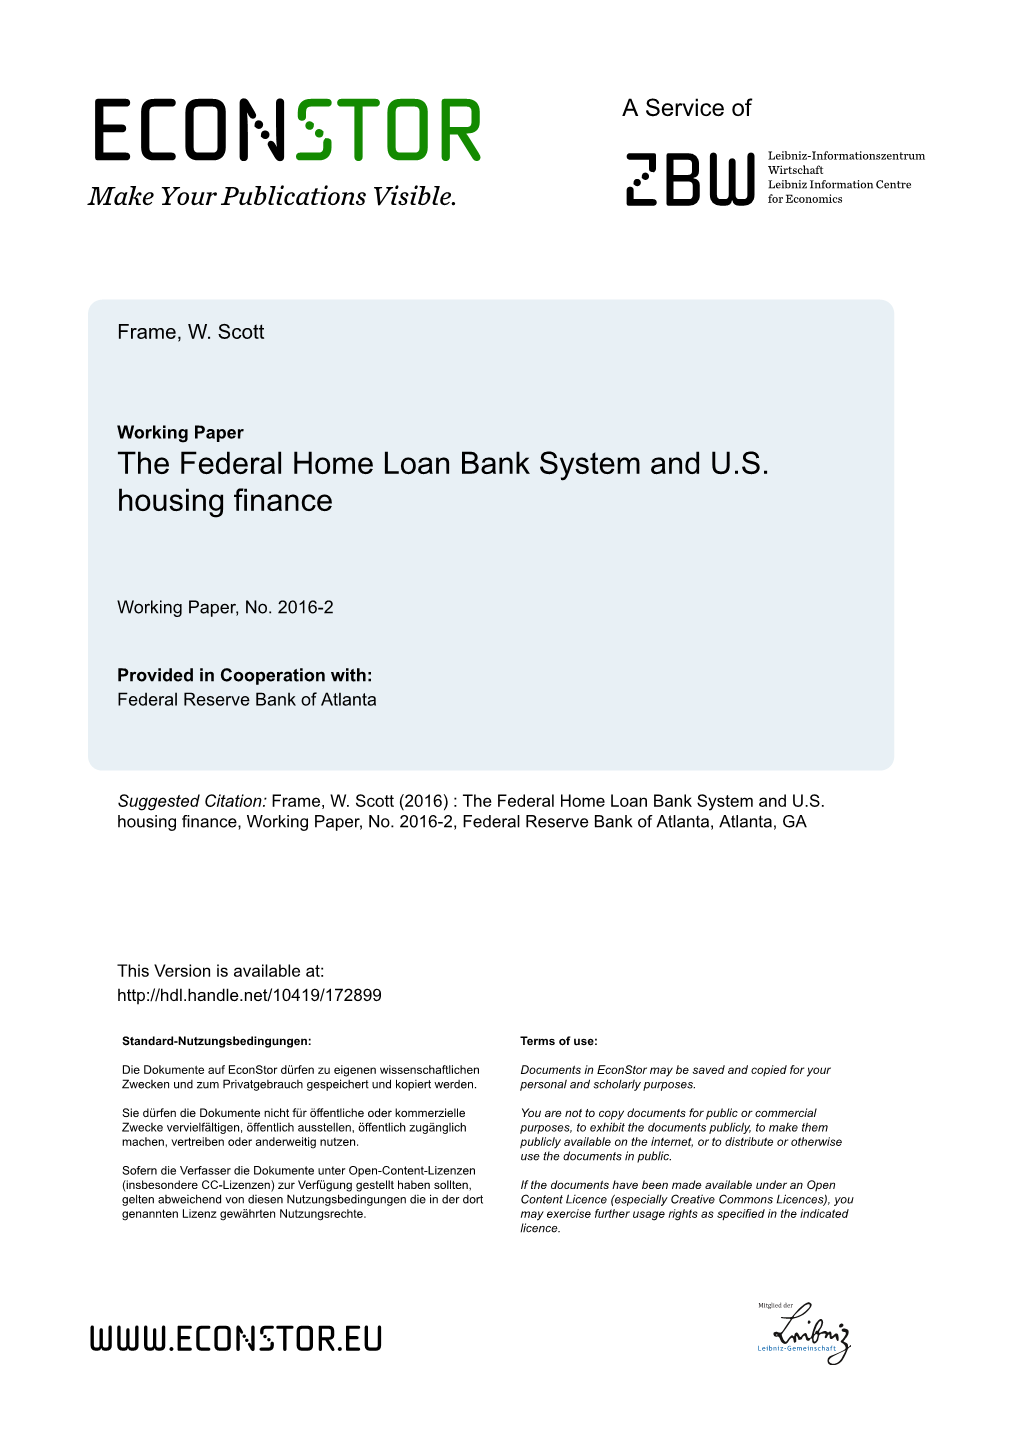 The Federal Home Loan Bank System and U.S. Housing Finance